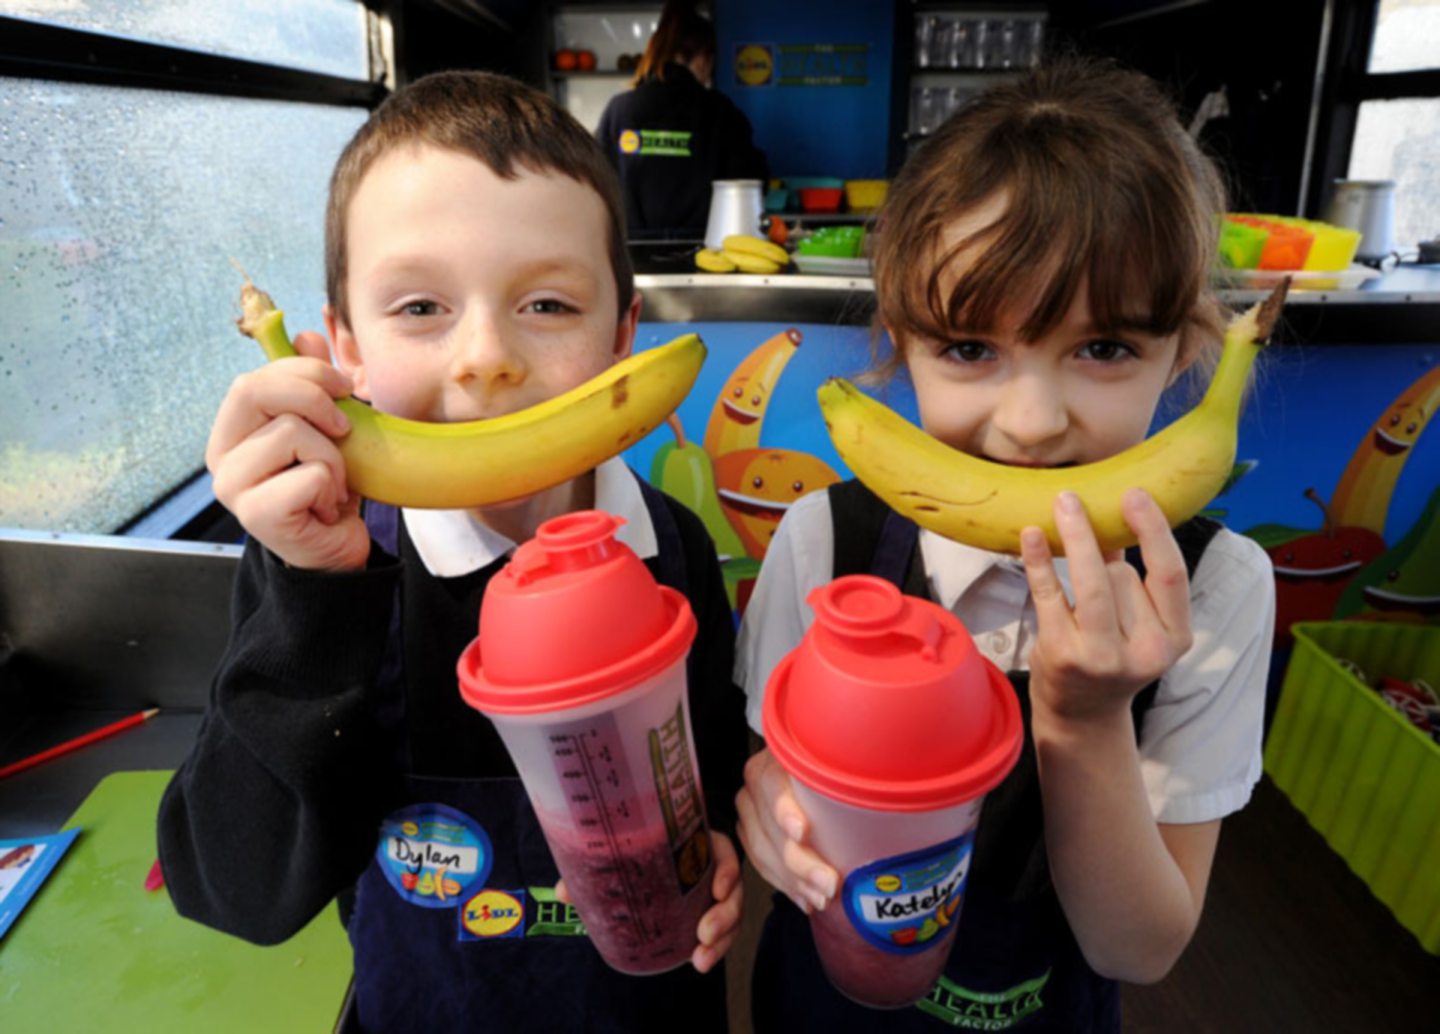 Dylan Jardine and Katelyn Leiper pose with smoothies they made when the Lidl health factor visited in 2014.